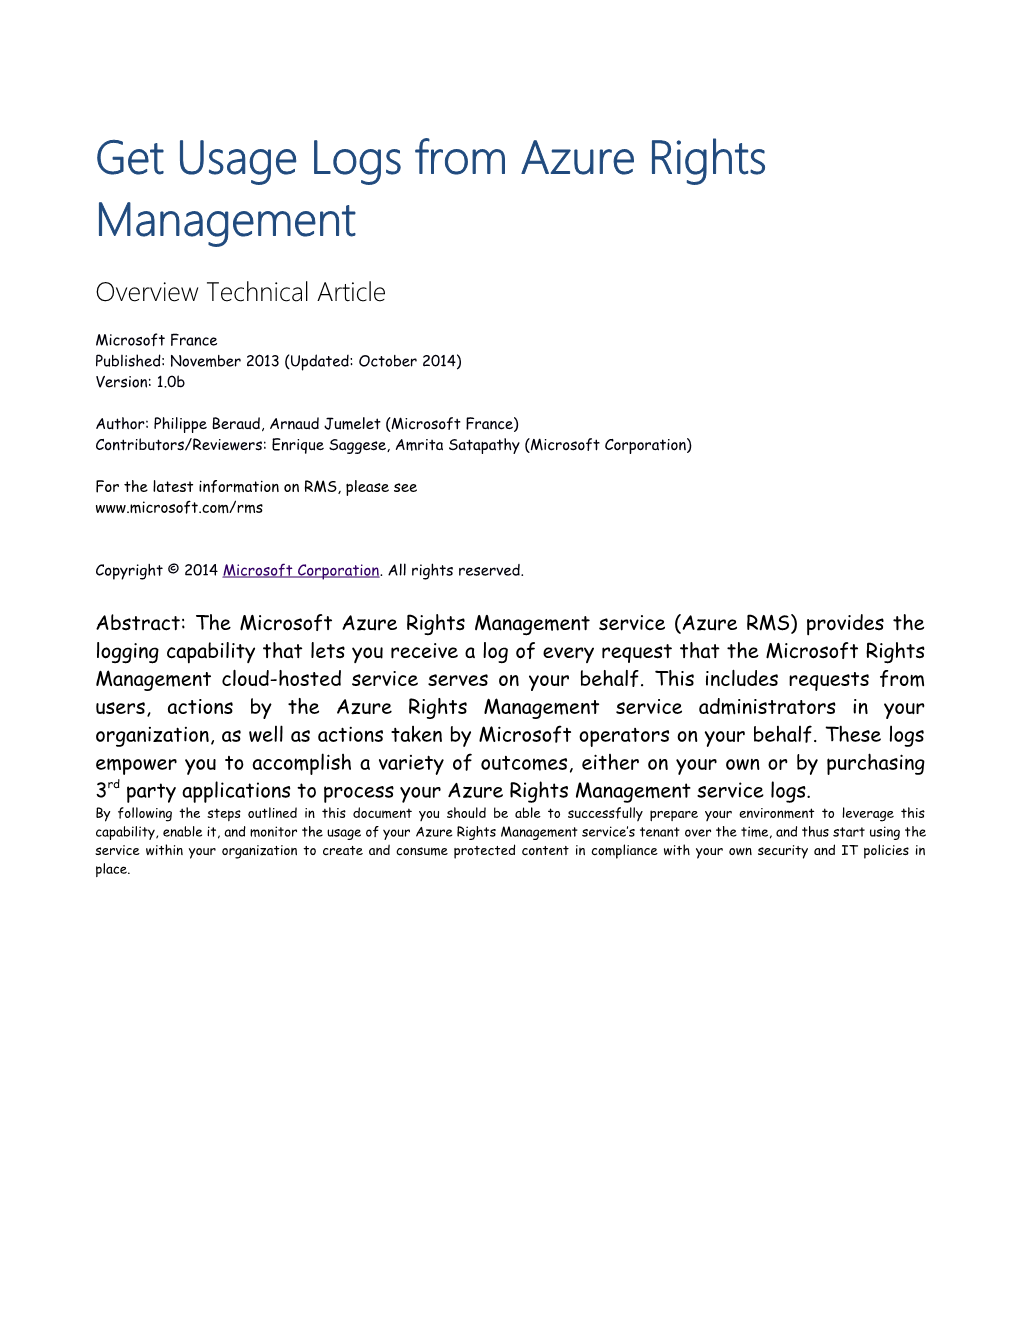 Get Usage Logs from Azure Rights Management